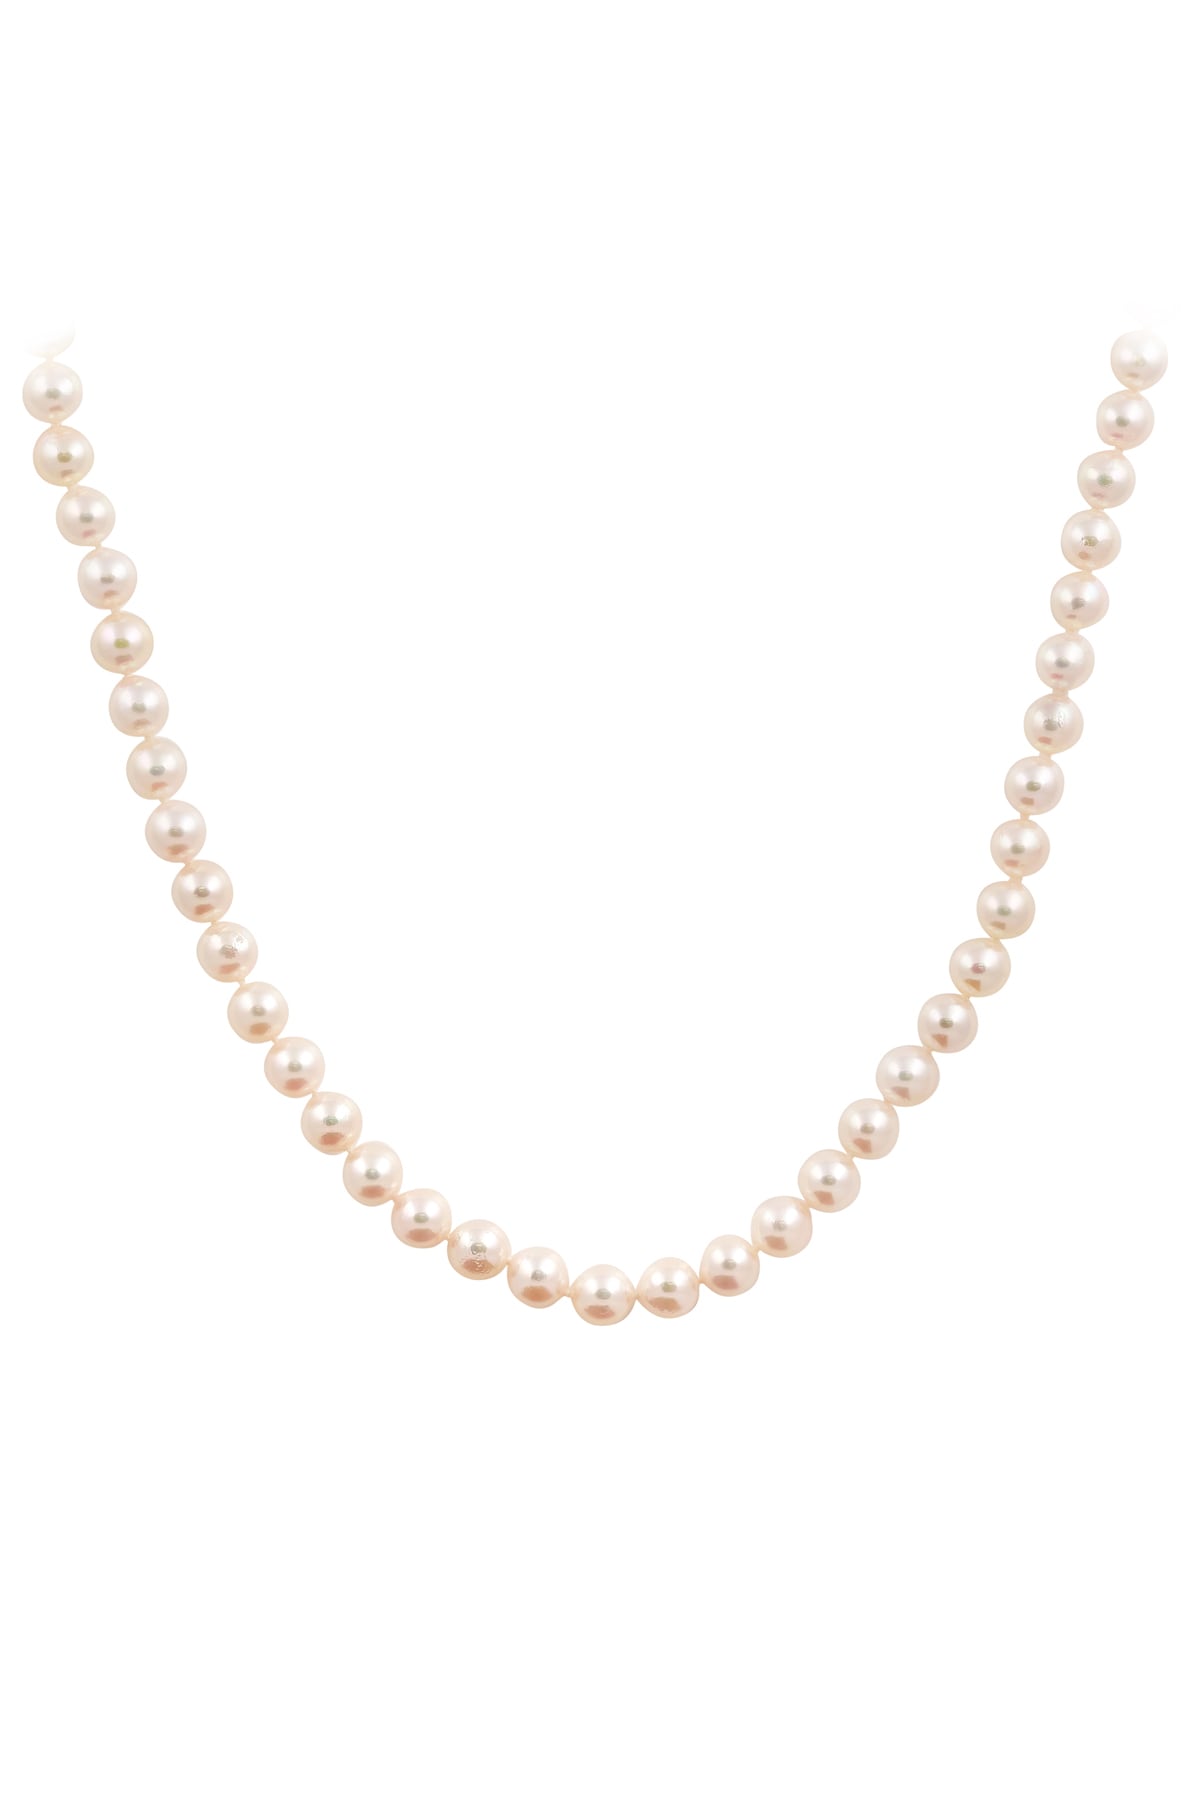 Japanese Akoya Pearl Strand Necklace from LeGassick Jewellery.